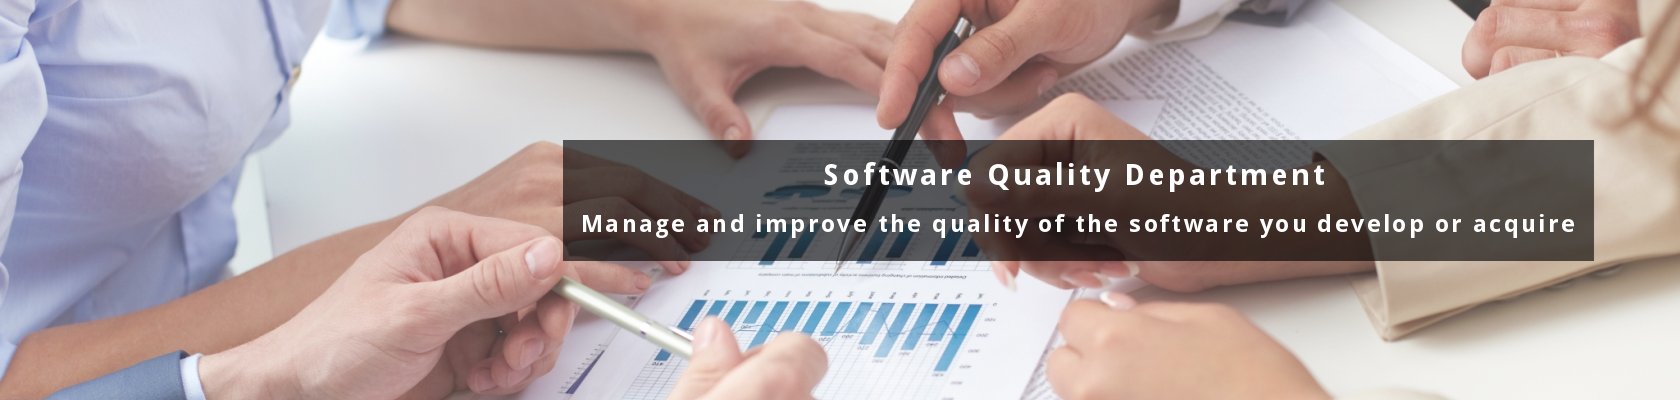 Software Quality Department